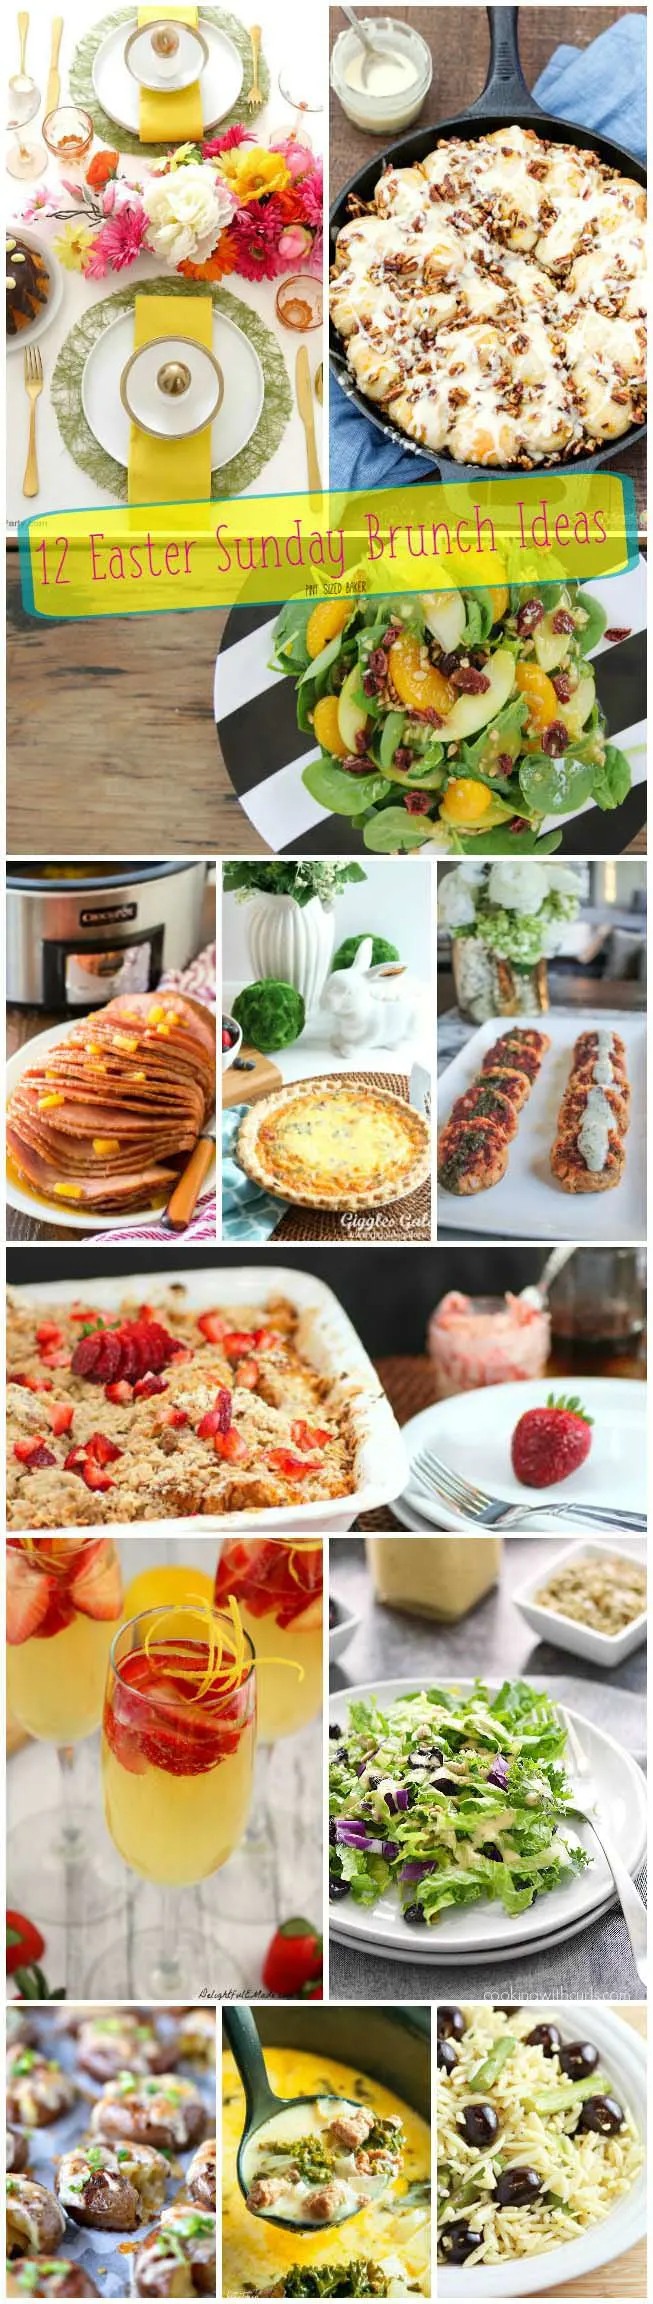 12 great Easter Sunday Brunch Ideas. Perfect for your family's holiday gathering!